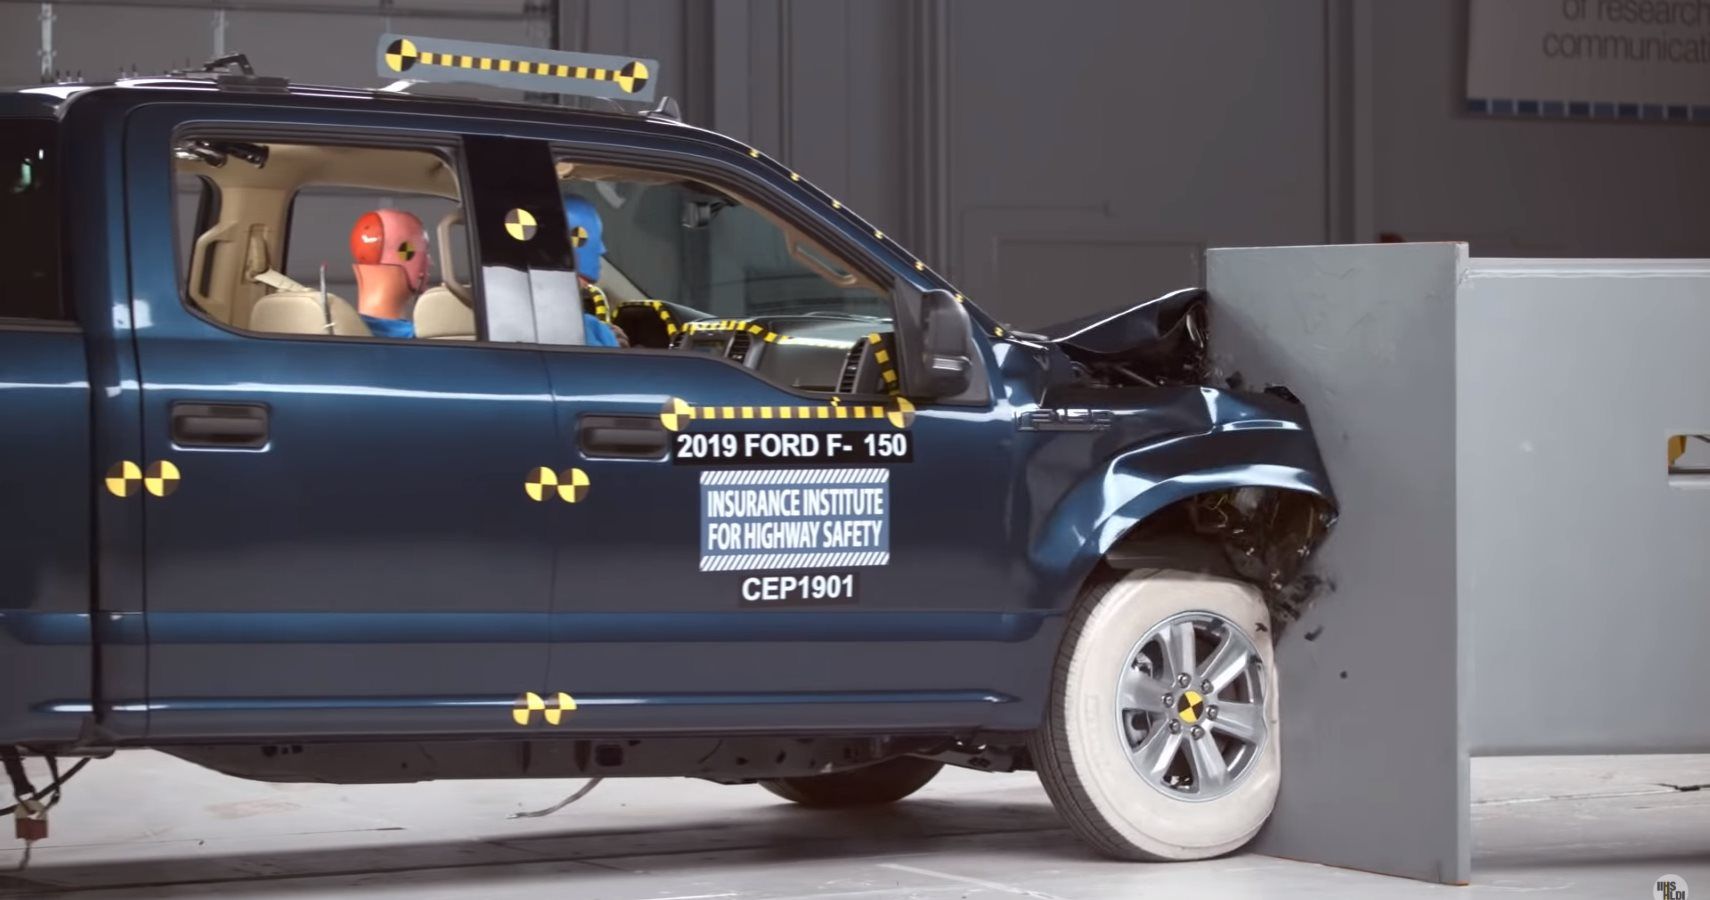 IIHS Release Pickup Truck Crash Tests, And The Ford F-150 Is The Clear Winner